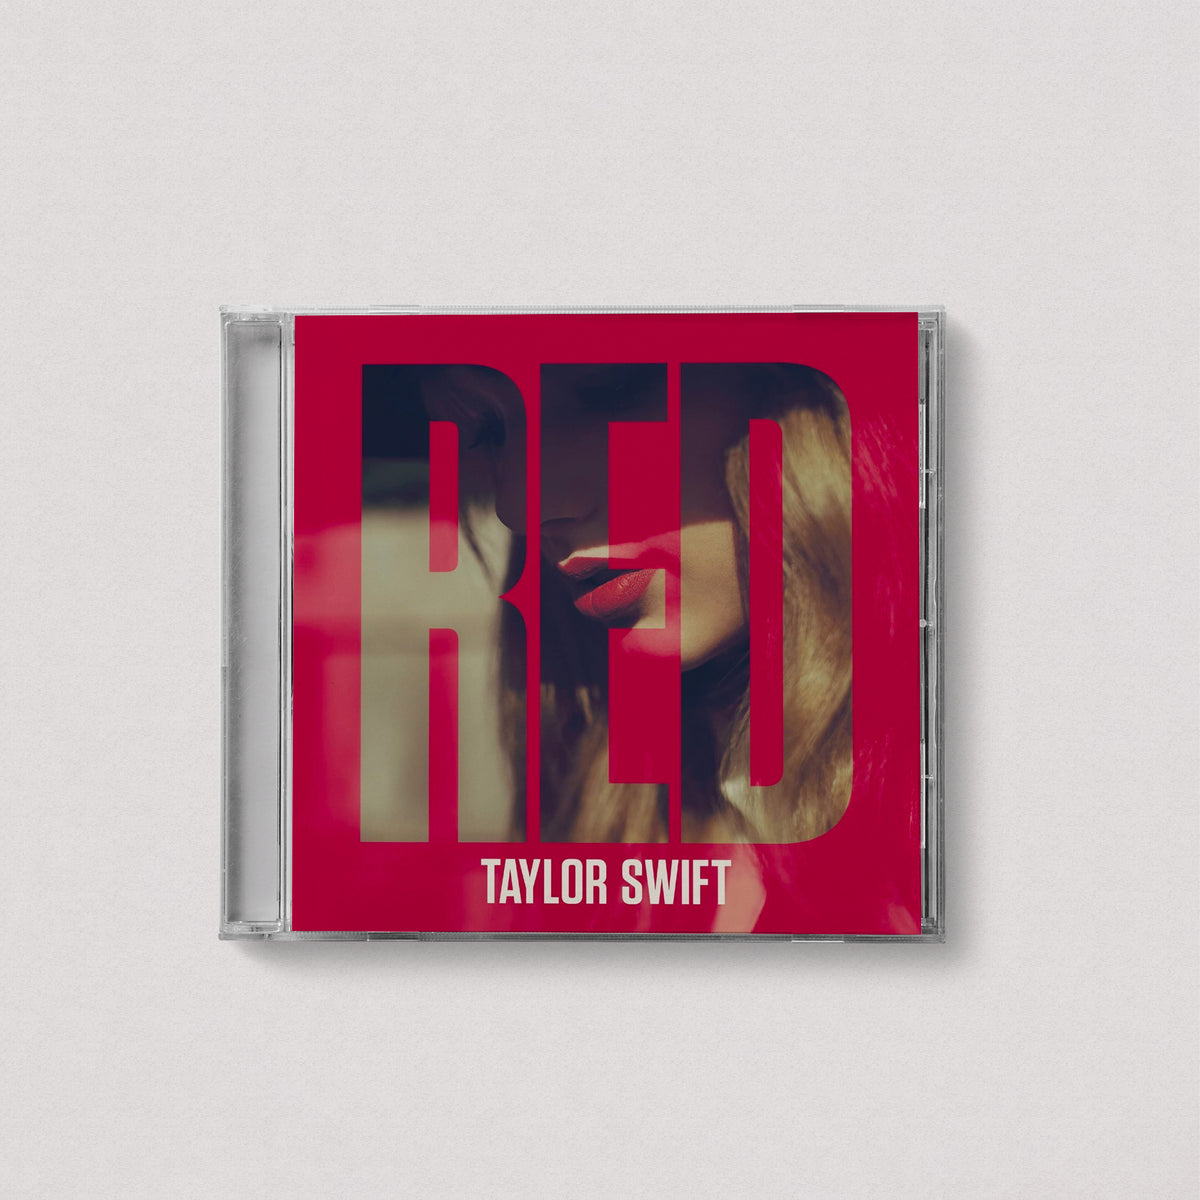 Taylor Swift - Red (Deluxe Edition, CD)